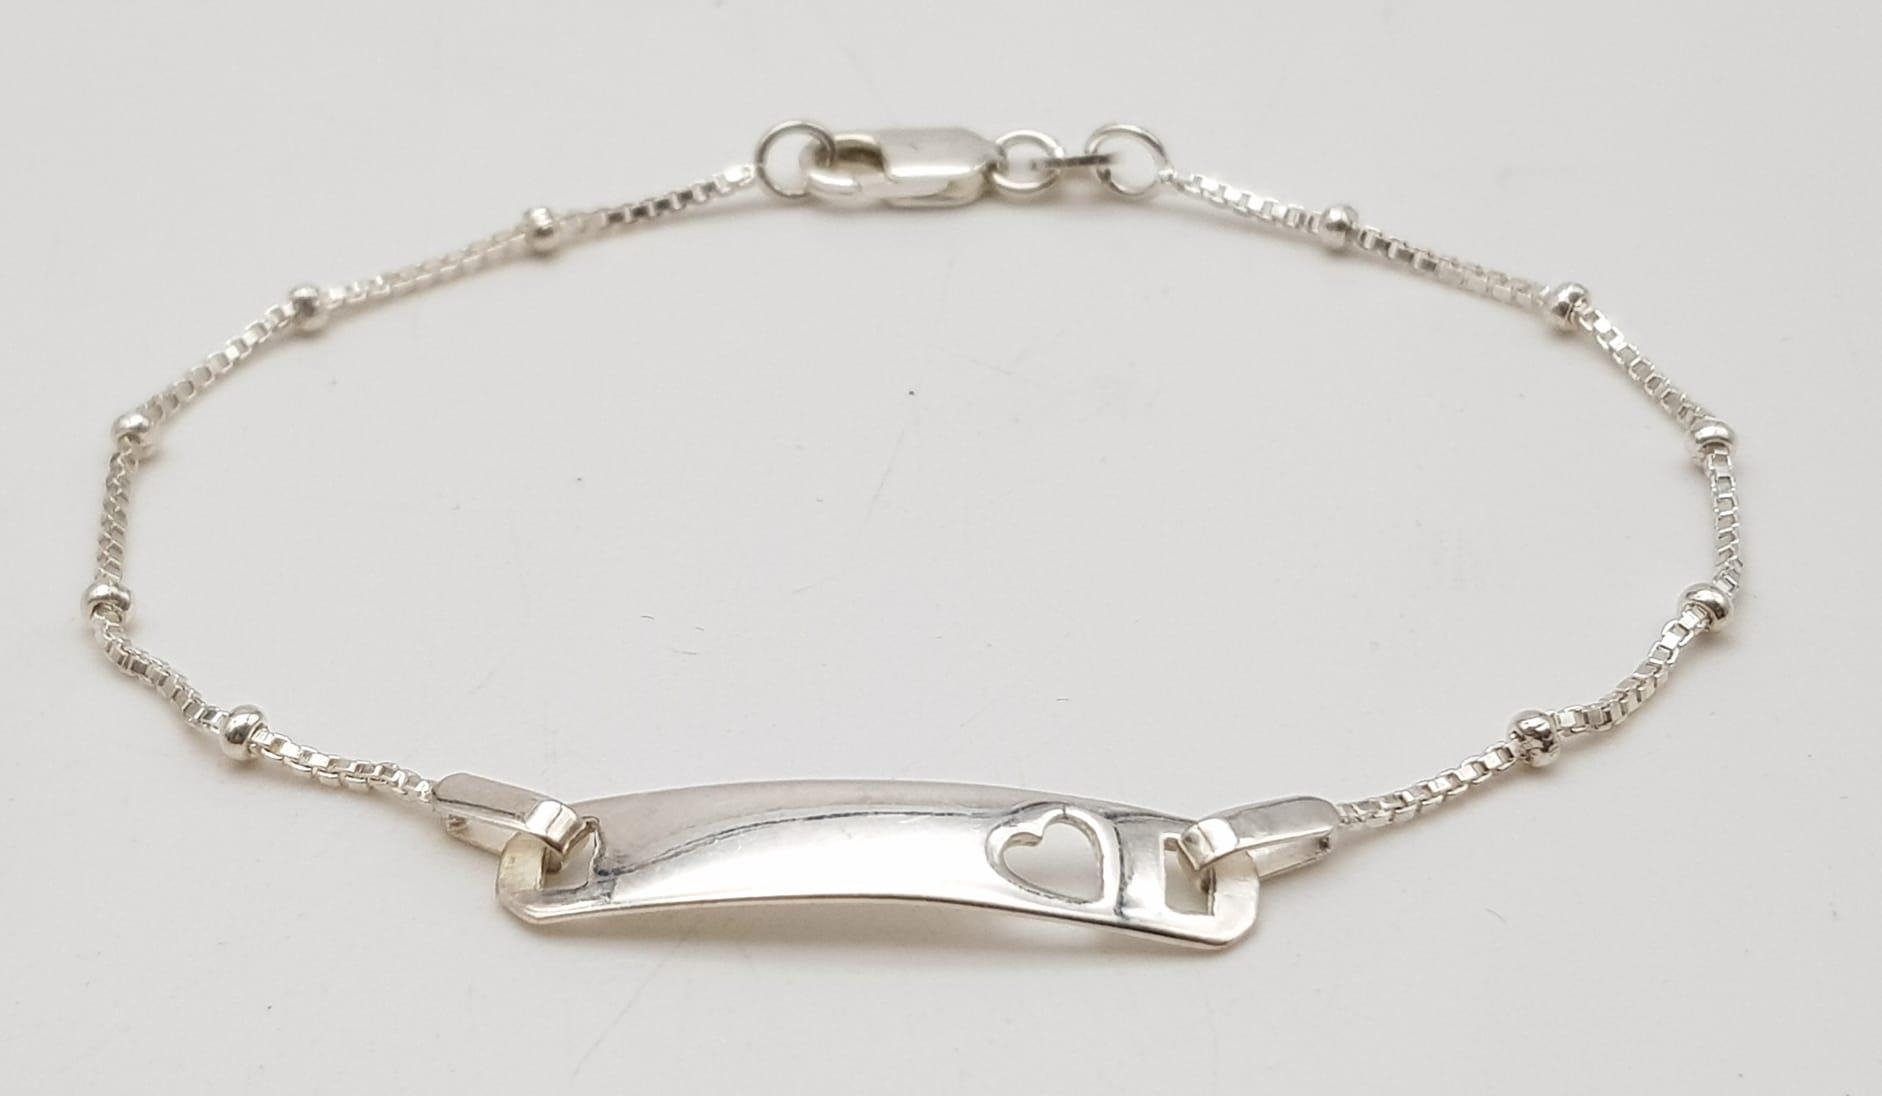 A sterling silver ID bracelet. weight: 3 g.